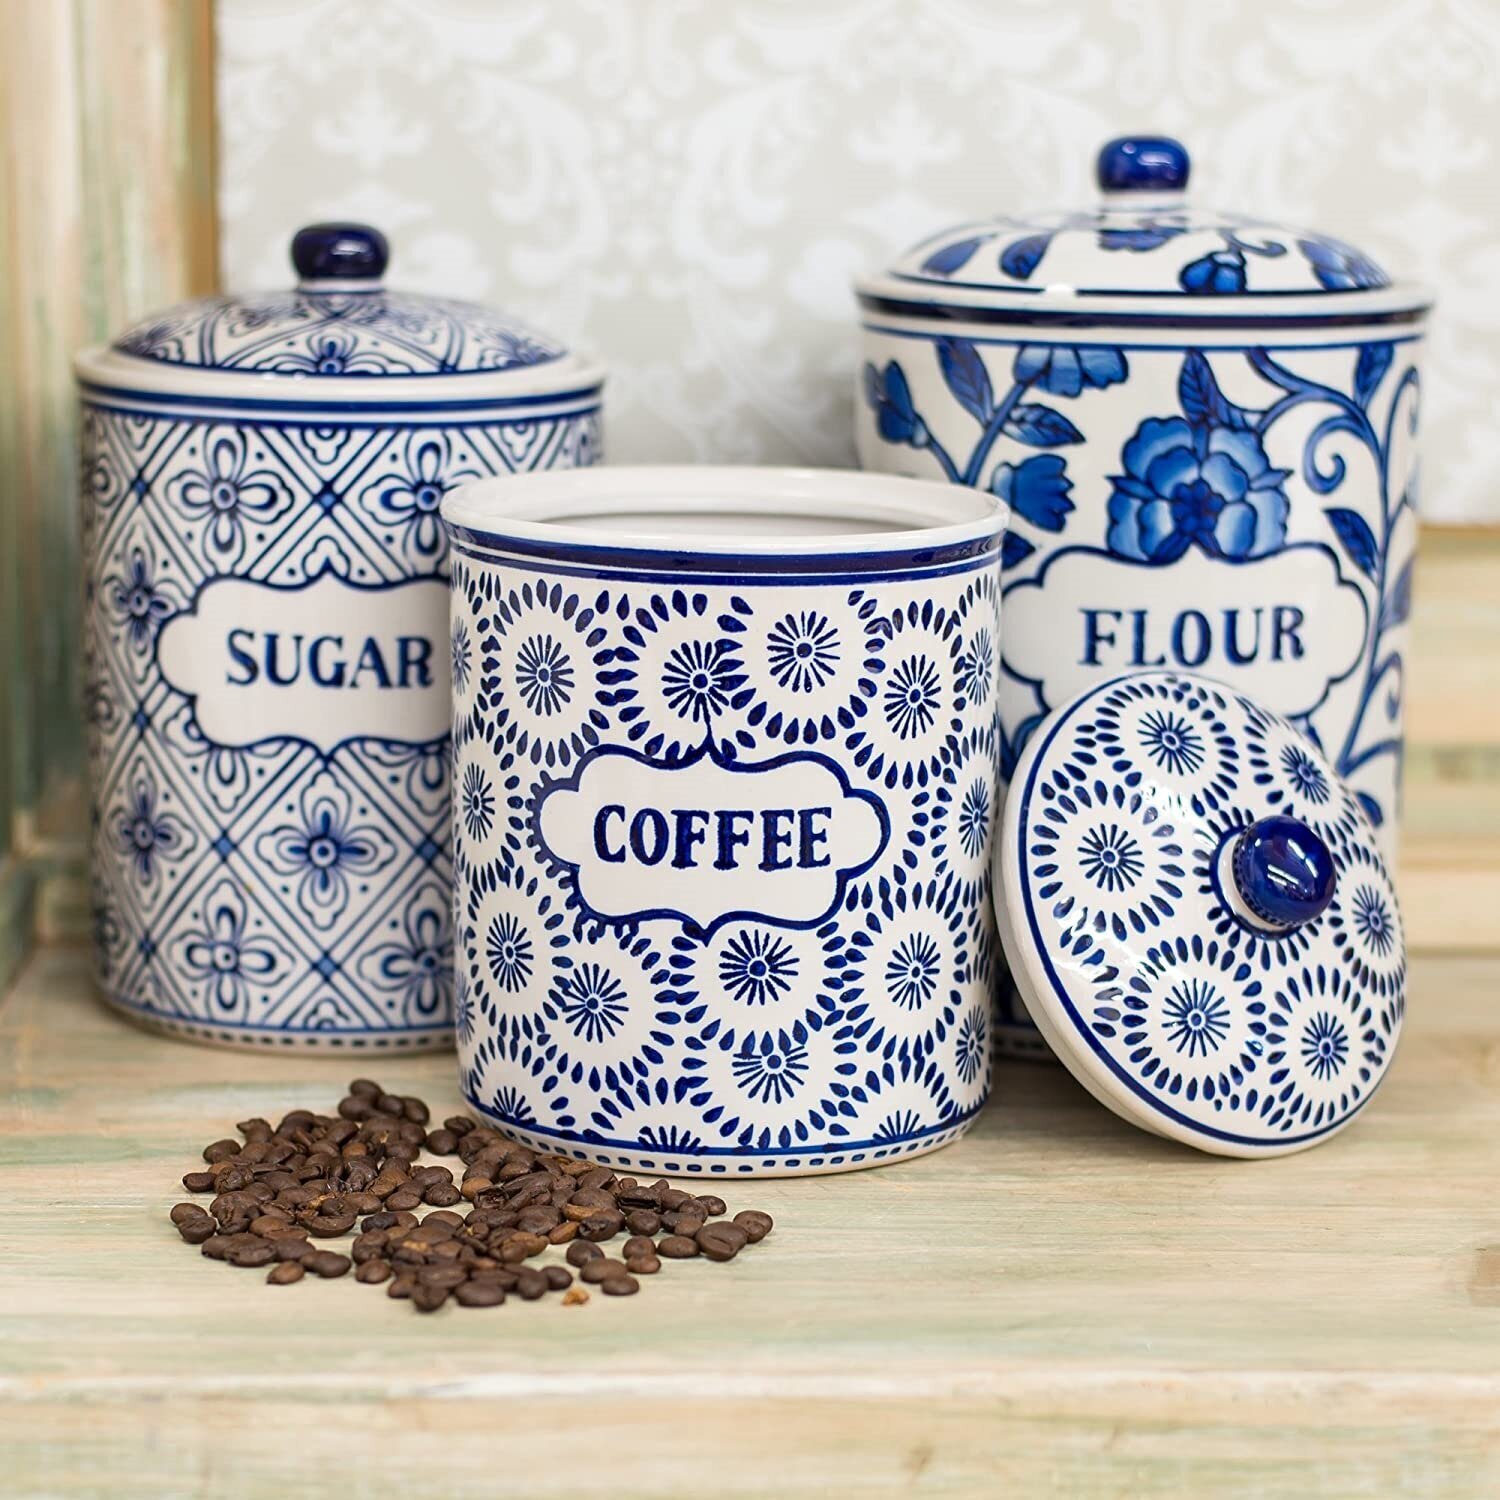 Beautiful Decorative Sugar, Coffee, and Flour Canisters 